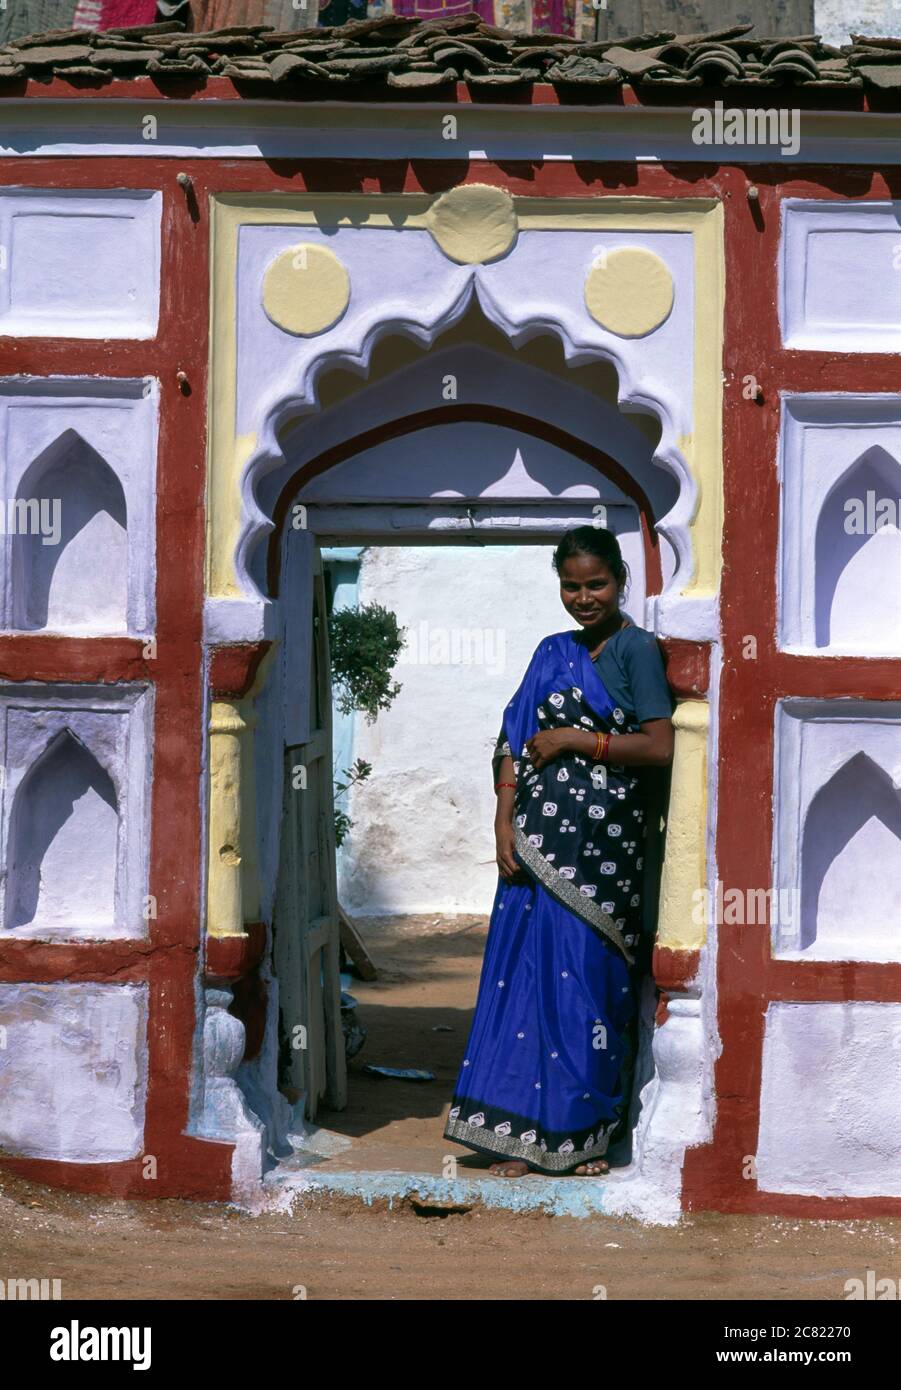 India, Rajasthan, Jodhpur, woman wearing colorful sari in front of a blue house. Stock Photo